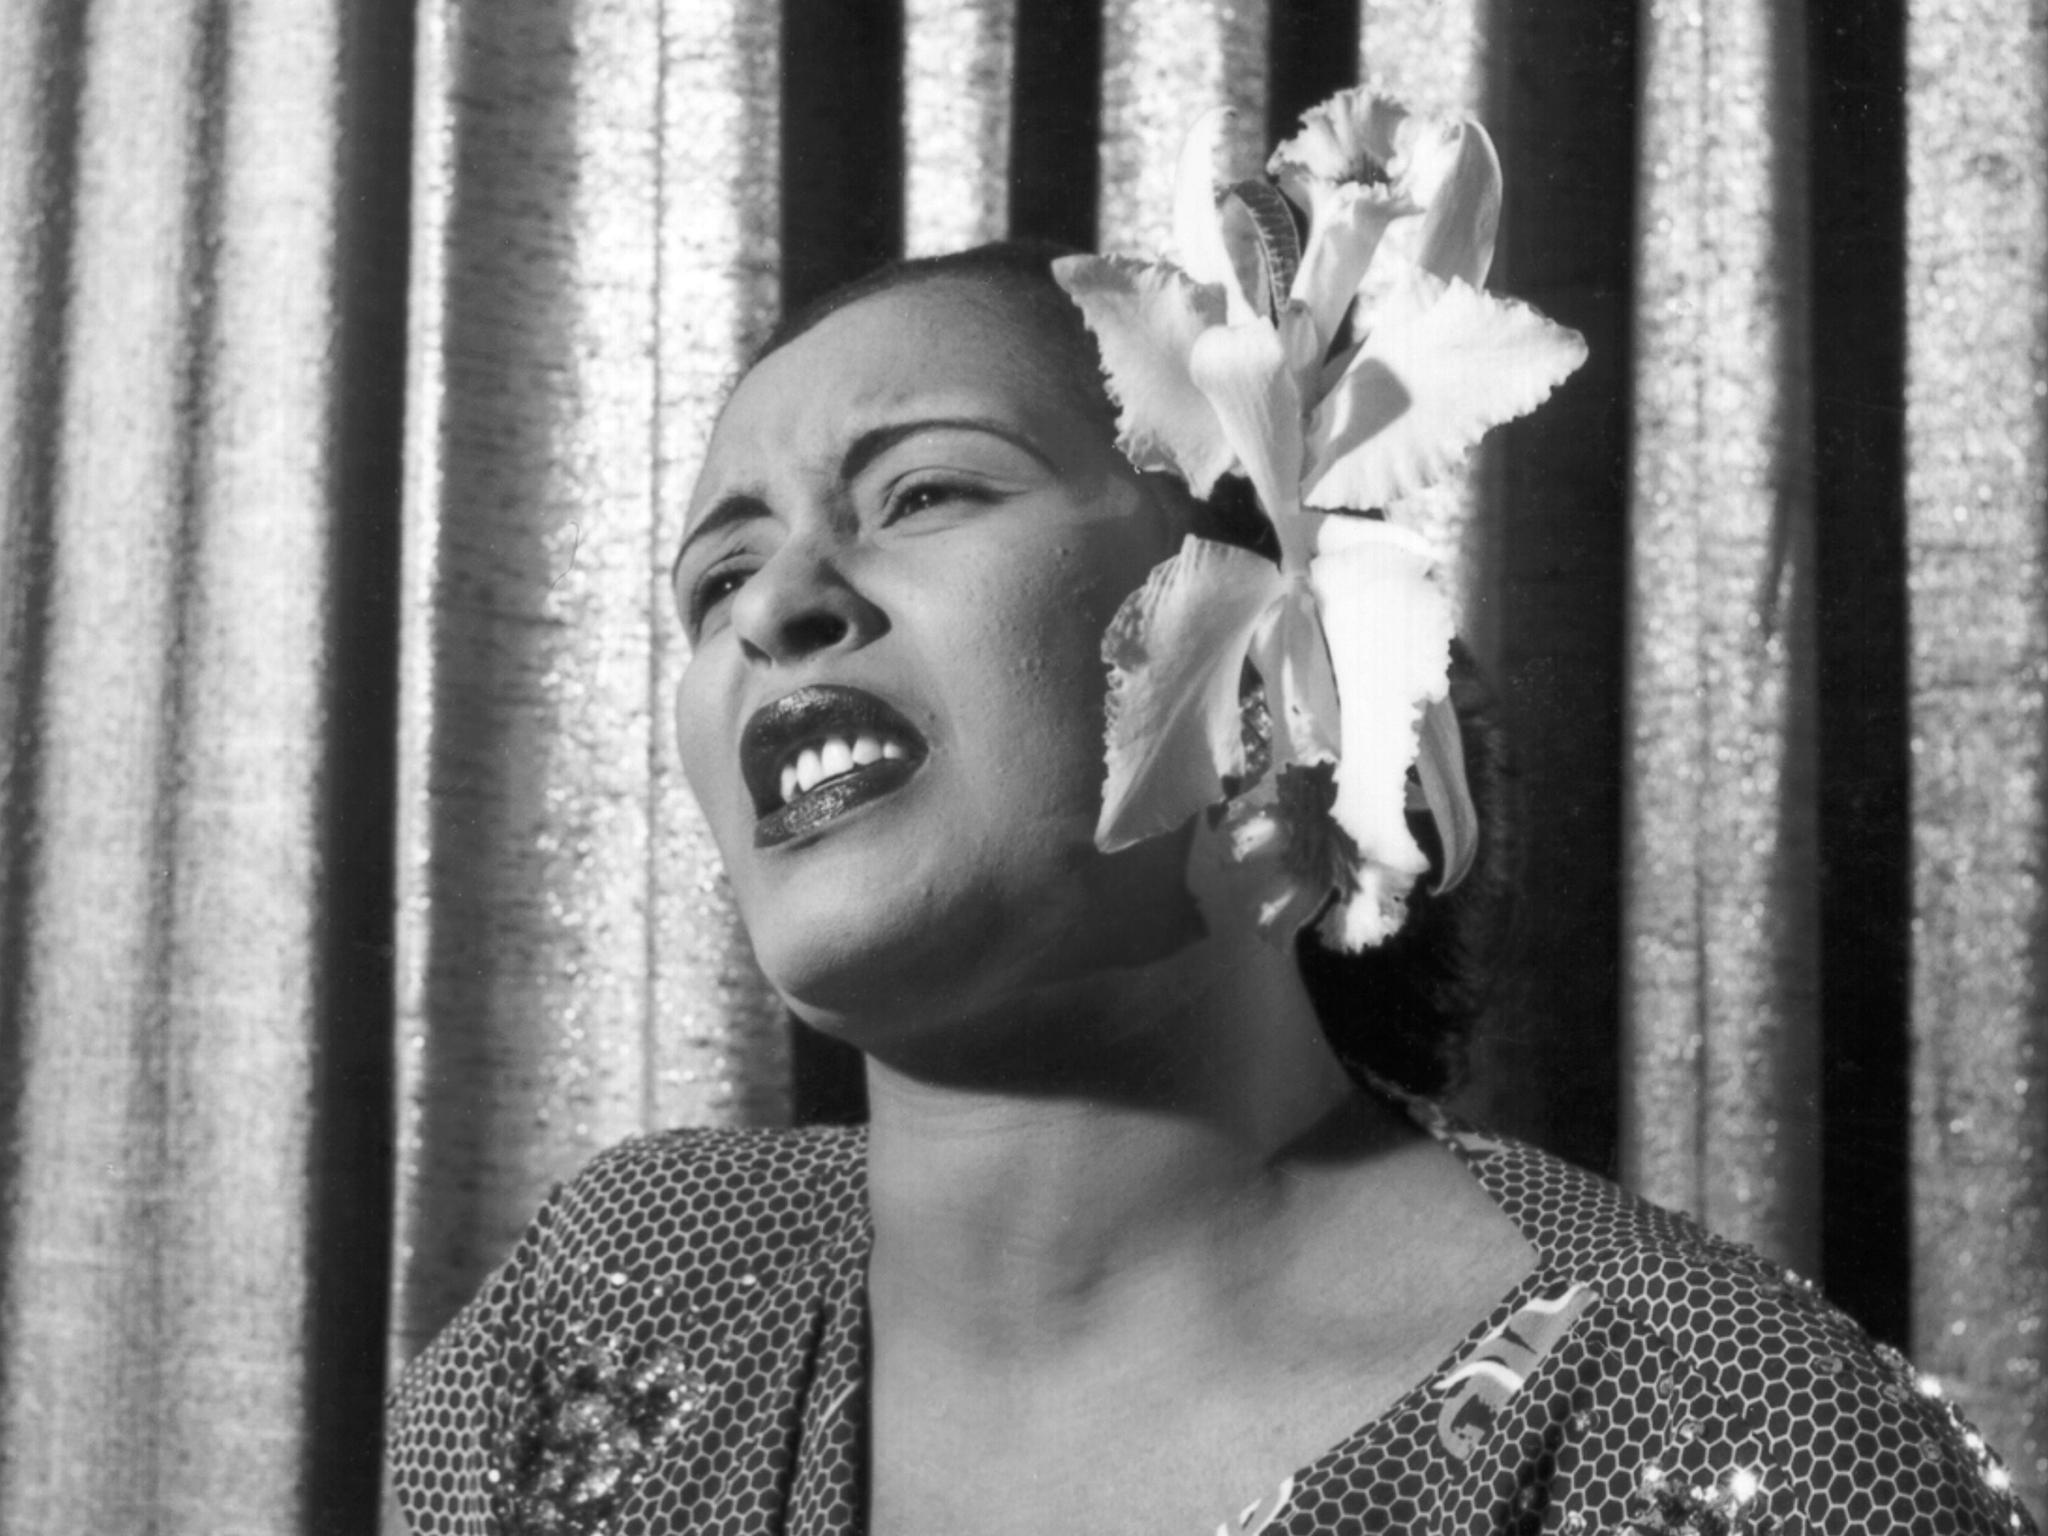 At her death, how much money was found strapped to Billie Holiday’s leg?